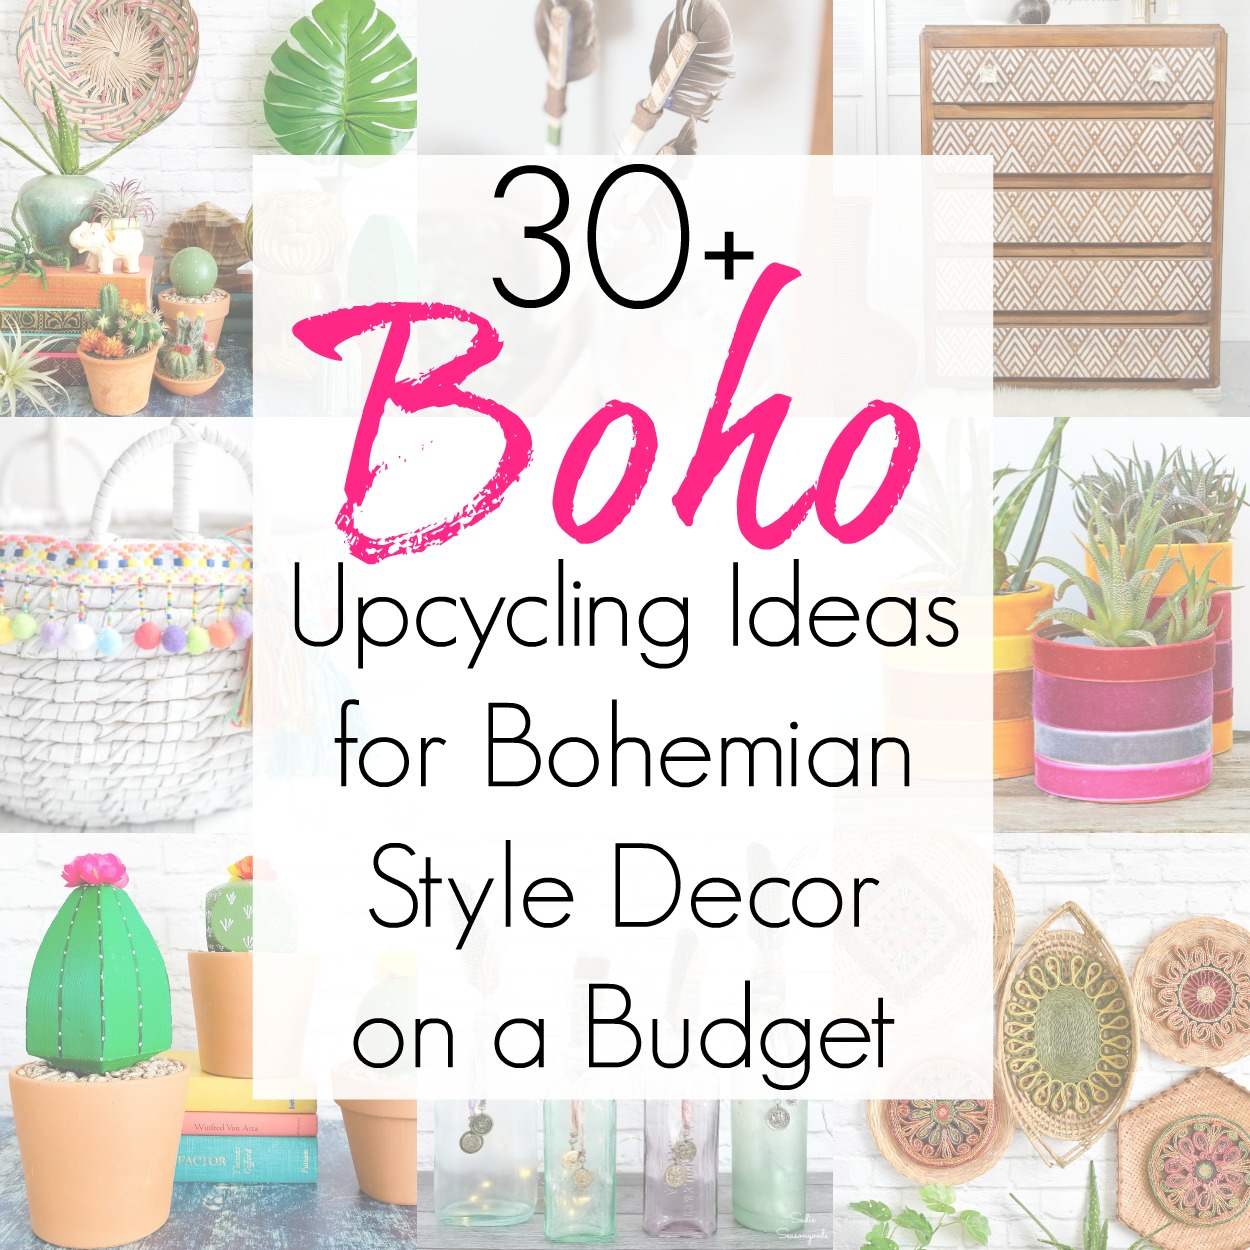 https://www.sadieseasongoods.com/wp-content/uploads/2020/03/Bohemian-style-decor-and-upcycling-projects-for-boho-decor-on-a-budget.jpg